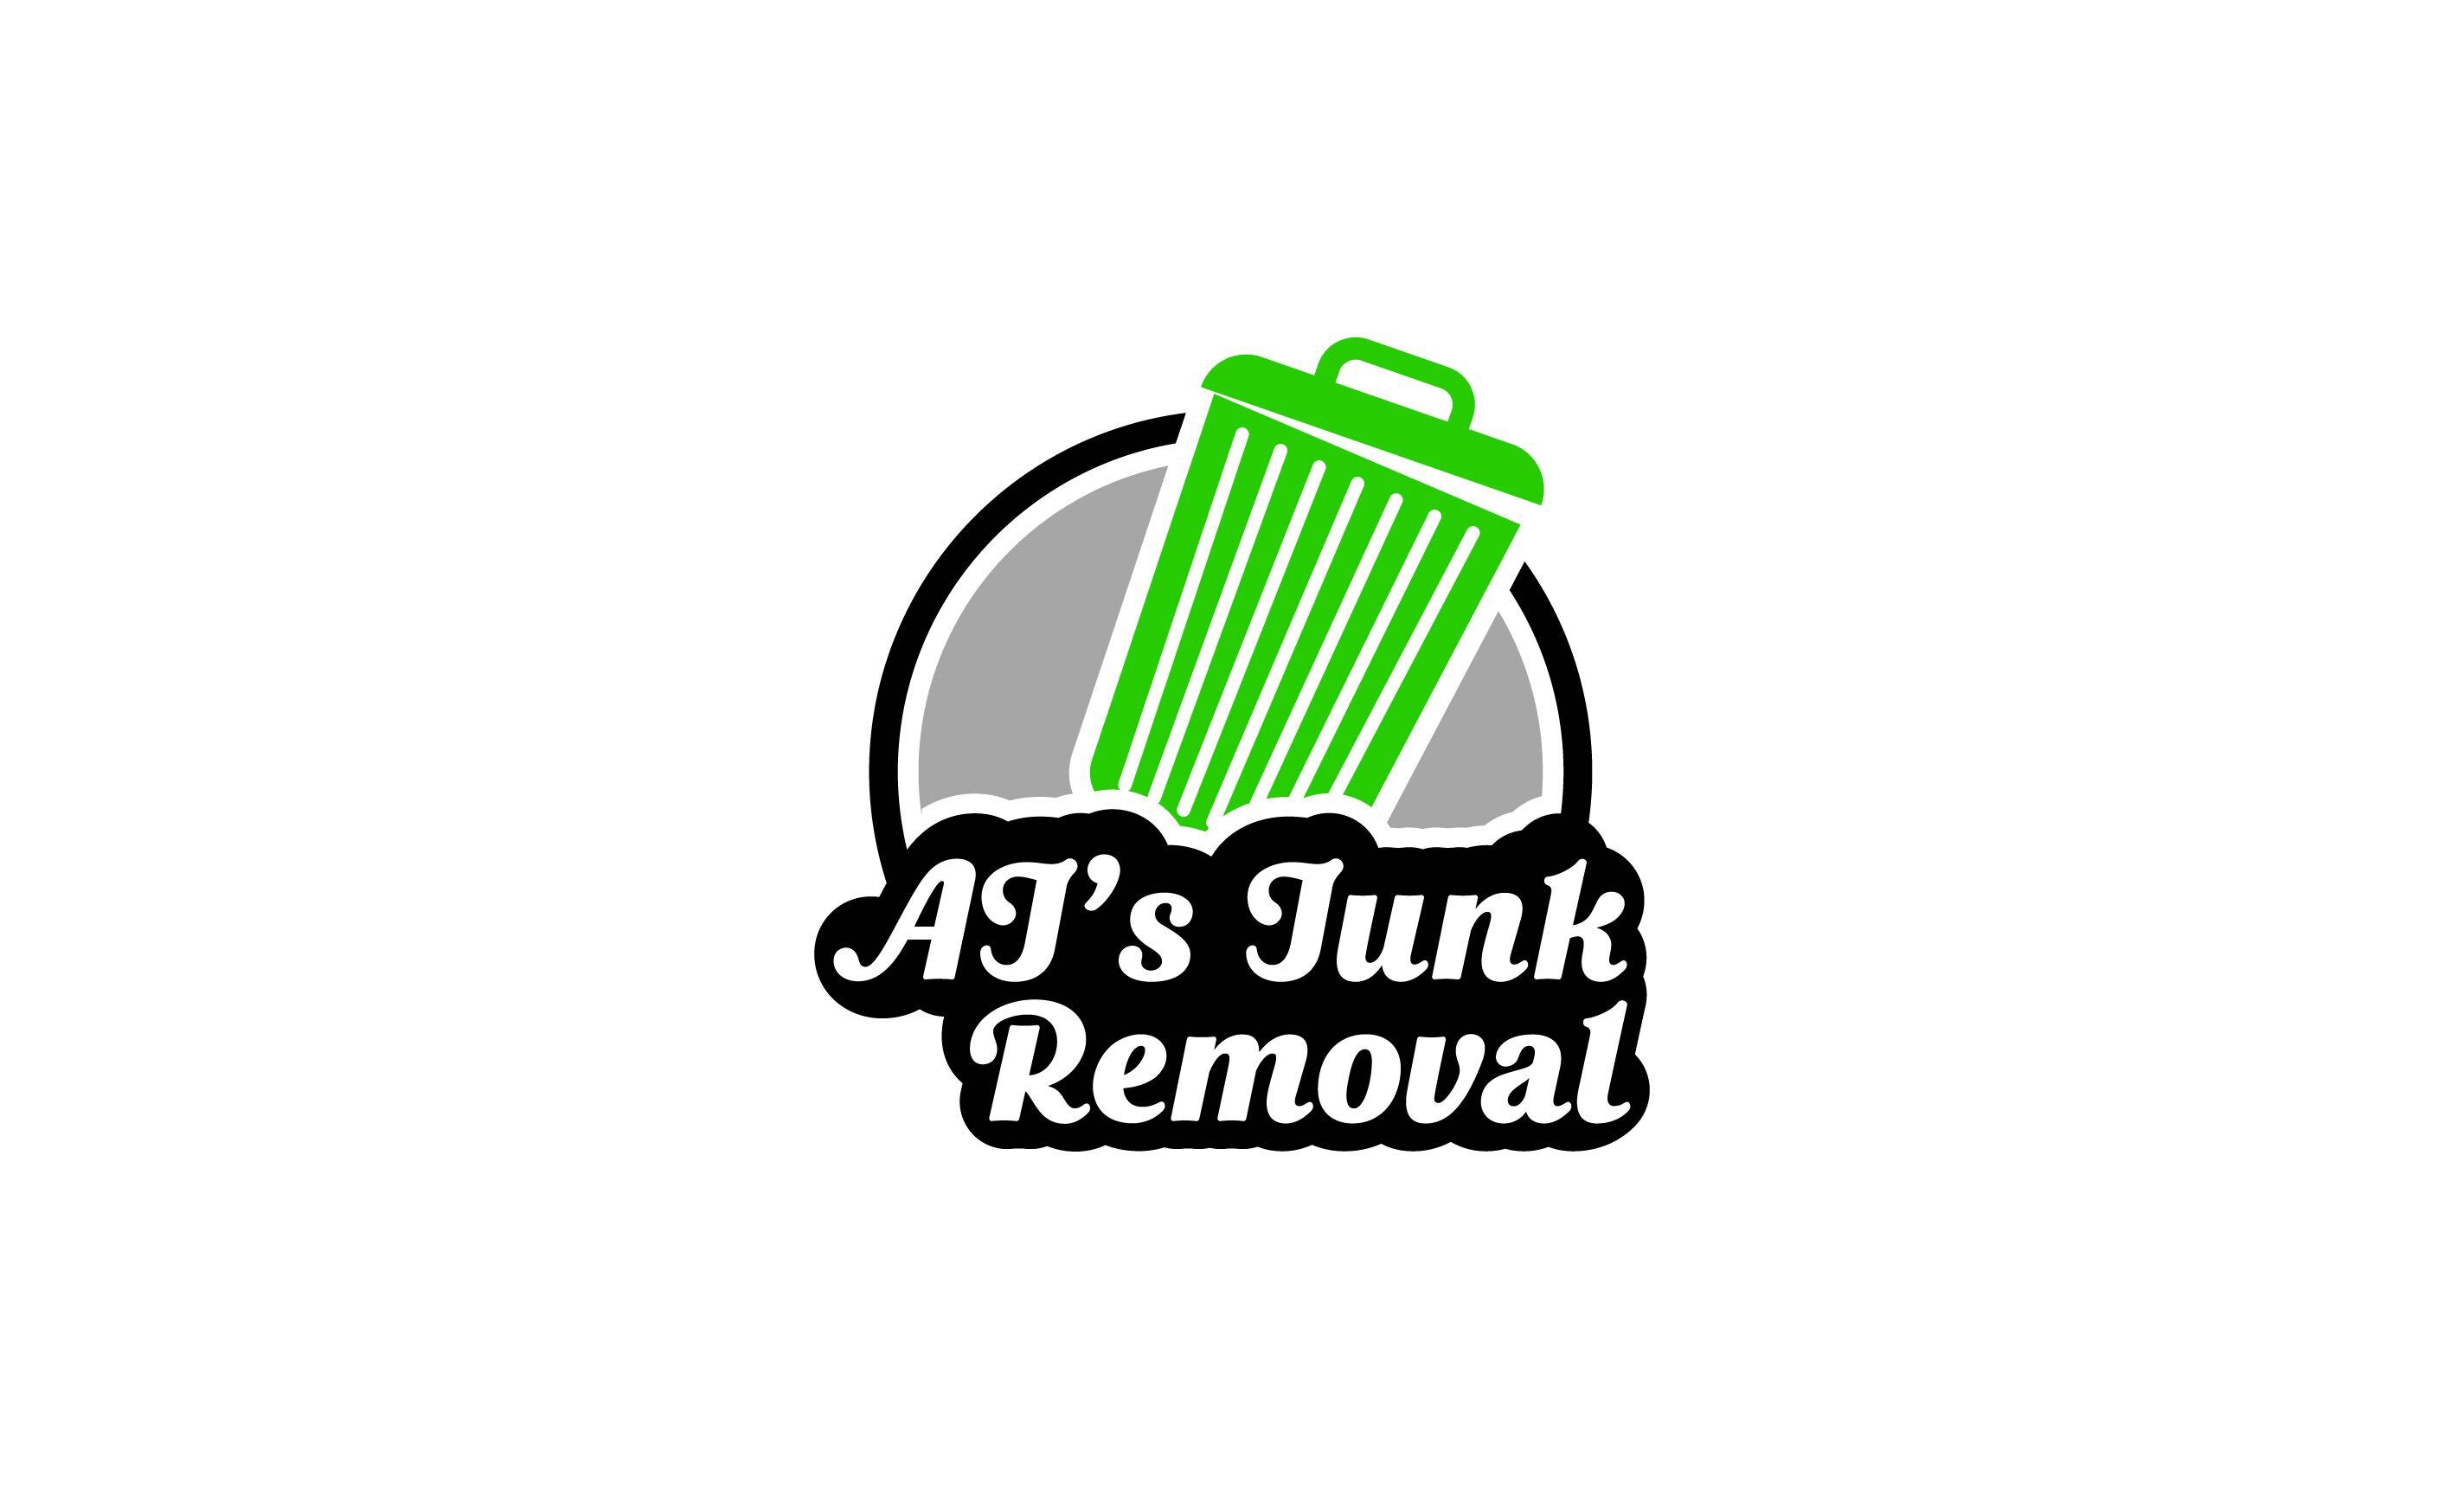 AJ's Junk Removal logo depicting a clean and professional junk removal service in Stamford.